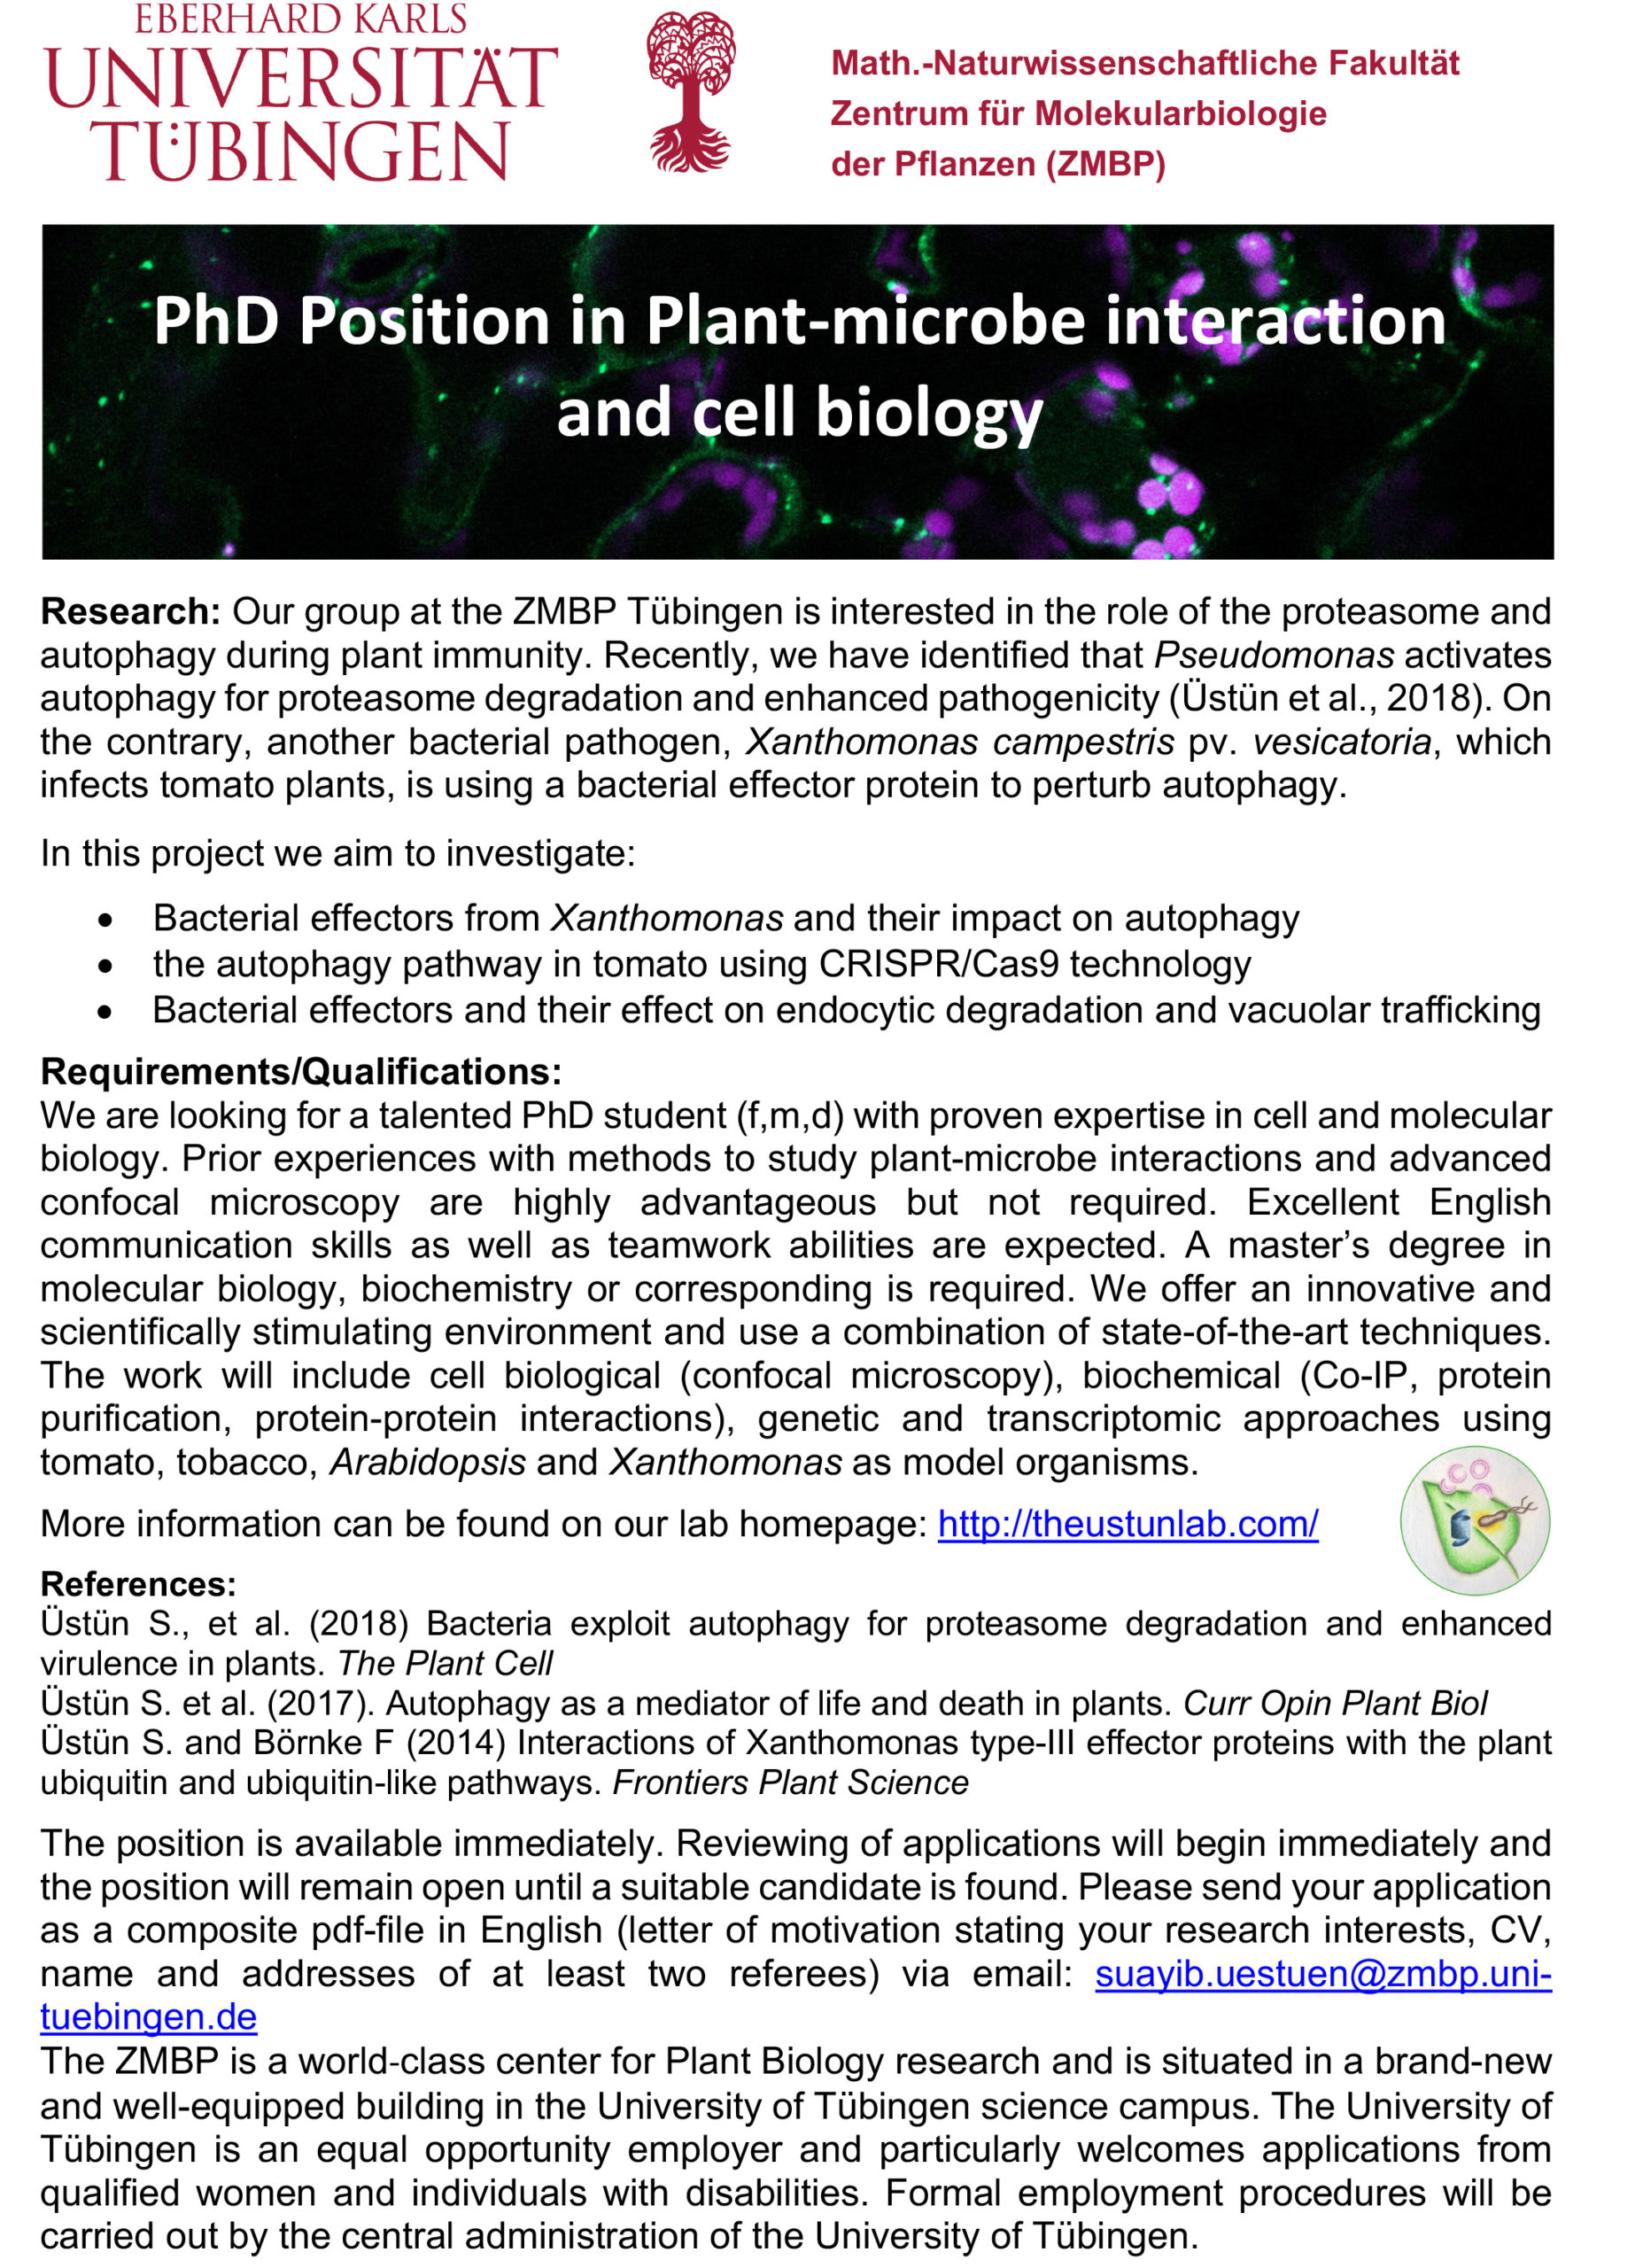 plant biology phd position germany